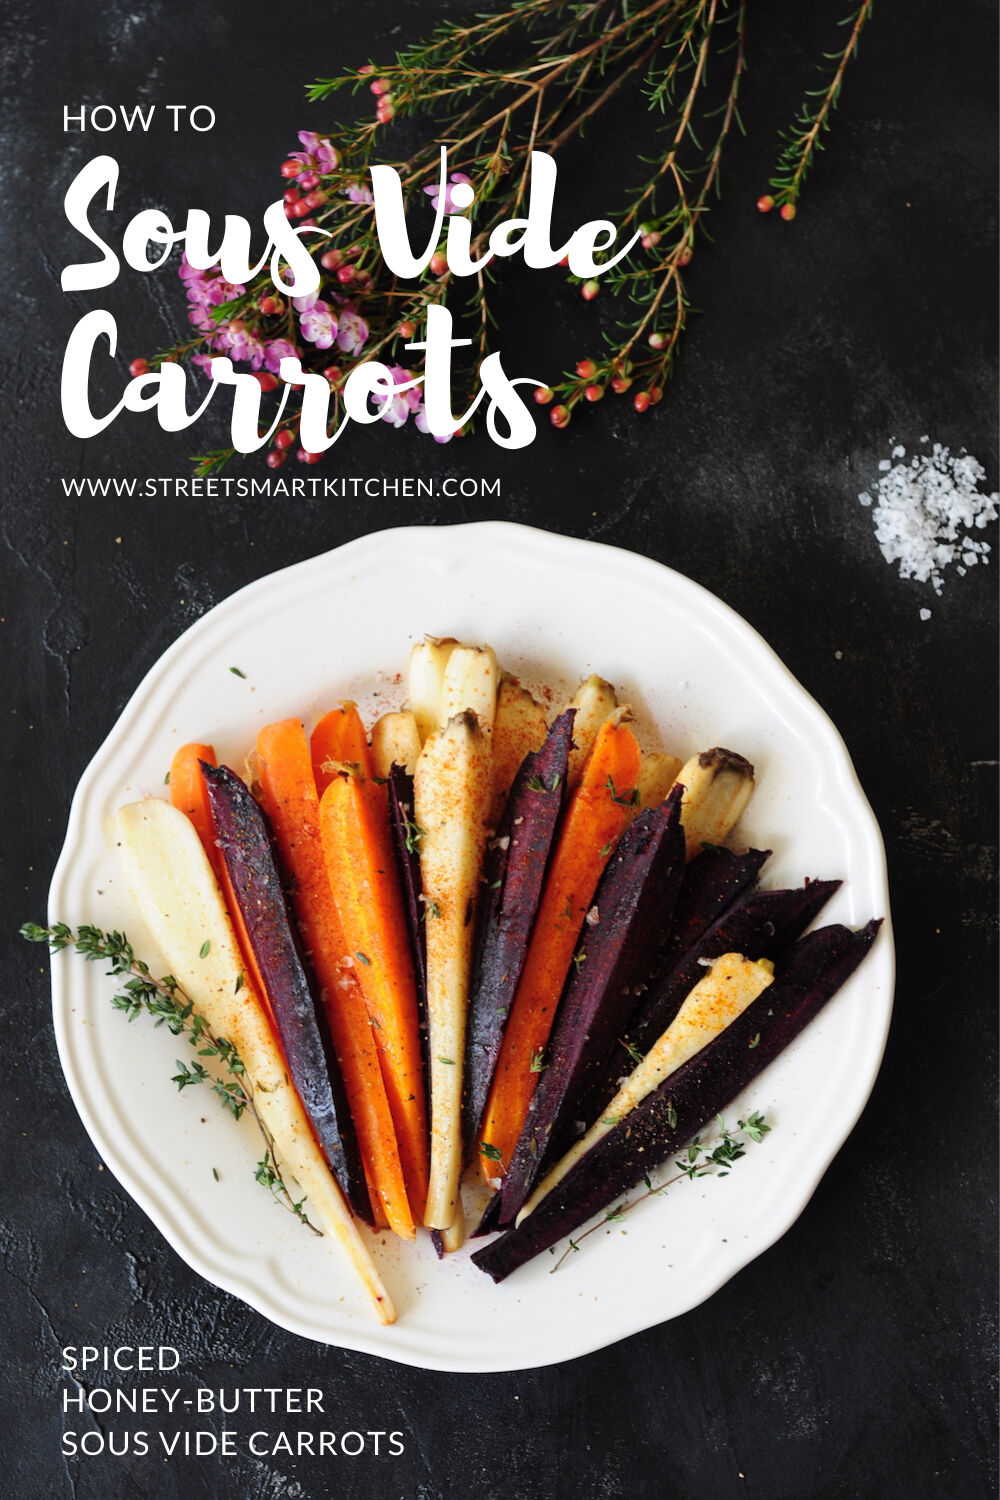 A step-by-step guide to sous vide carrots along with a spiced honey-butter carrot recipe that changes your carrot game forever!